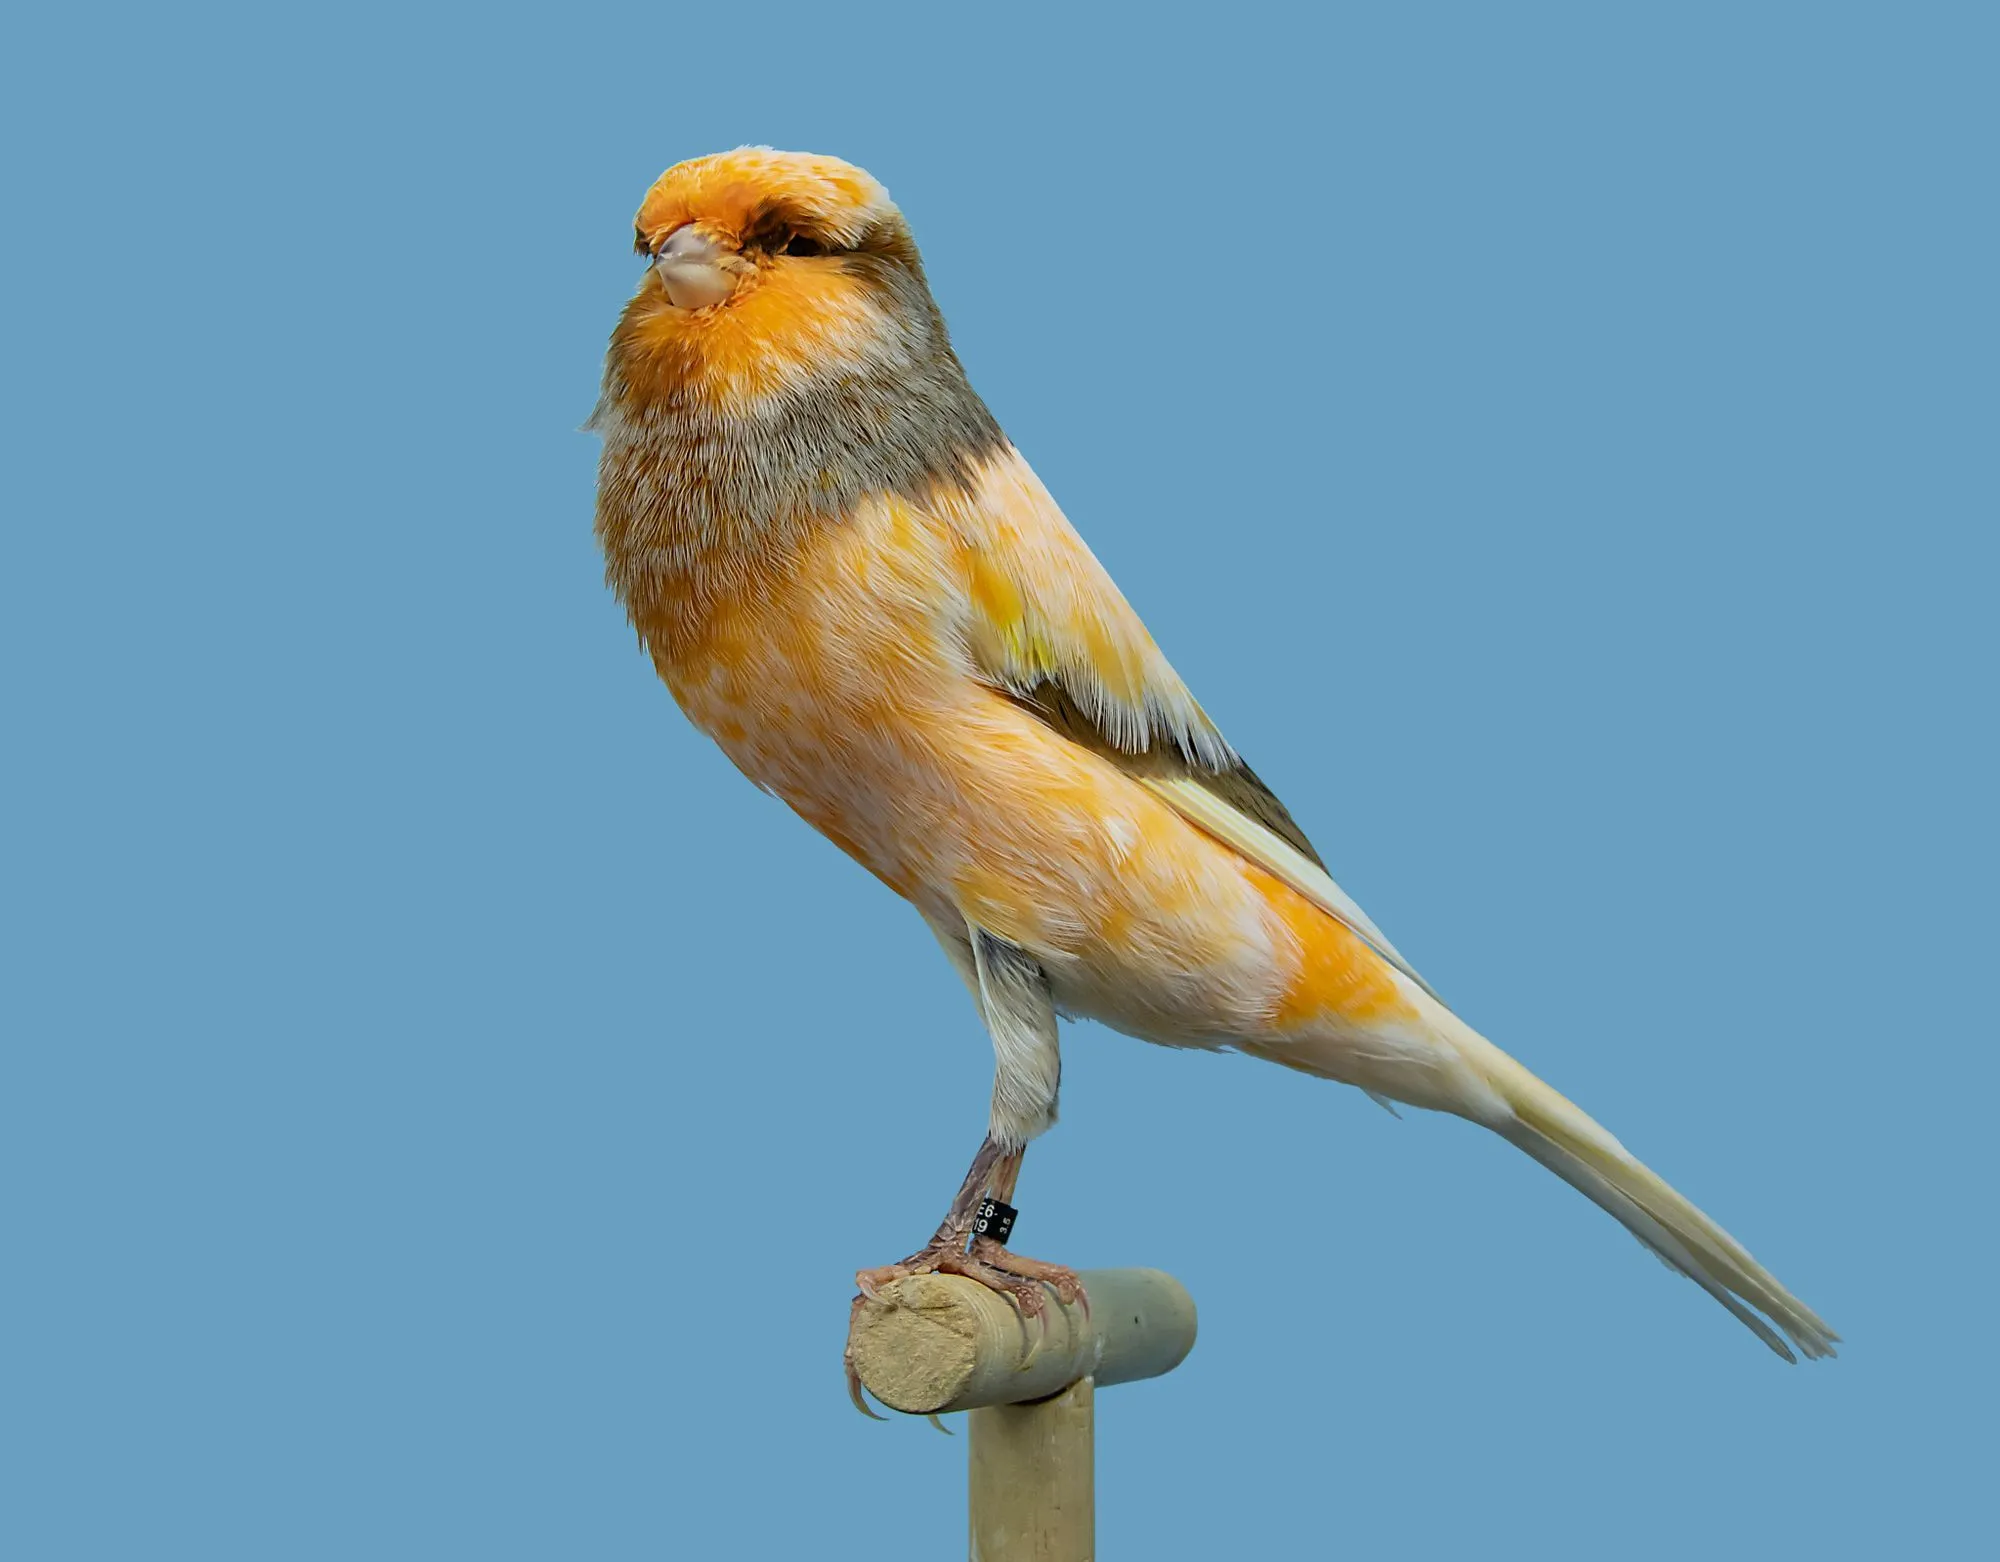 15 Amaze-wing Facts About The Yorkshire Canary For Kids